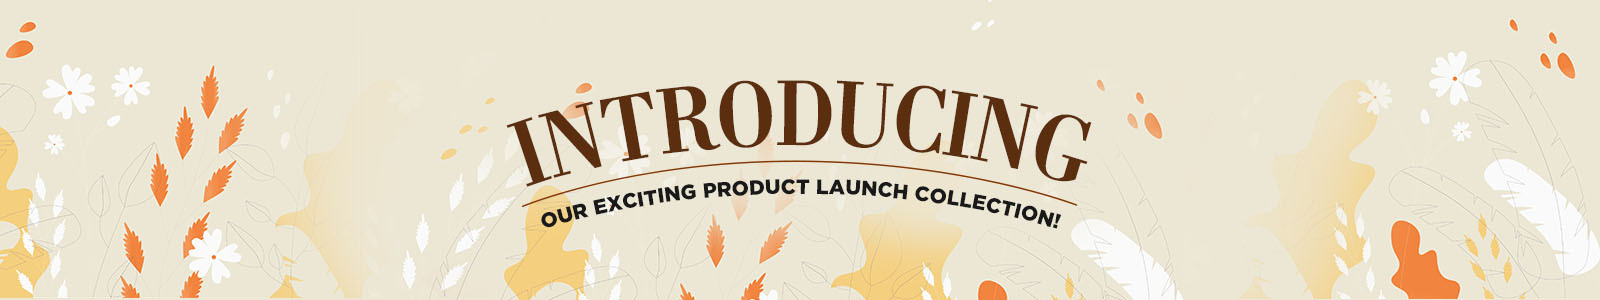 Introducing our Exciting Product Launch Collection! Shop today